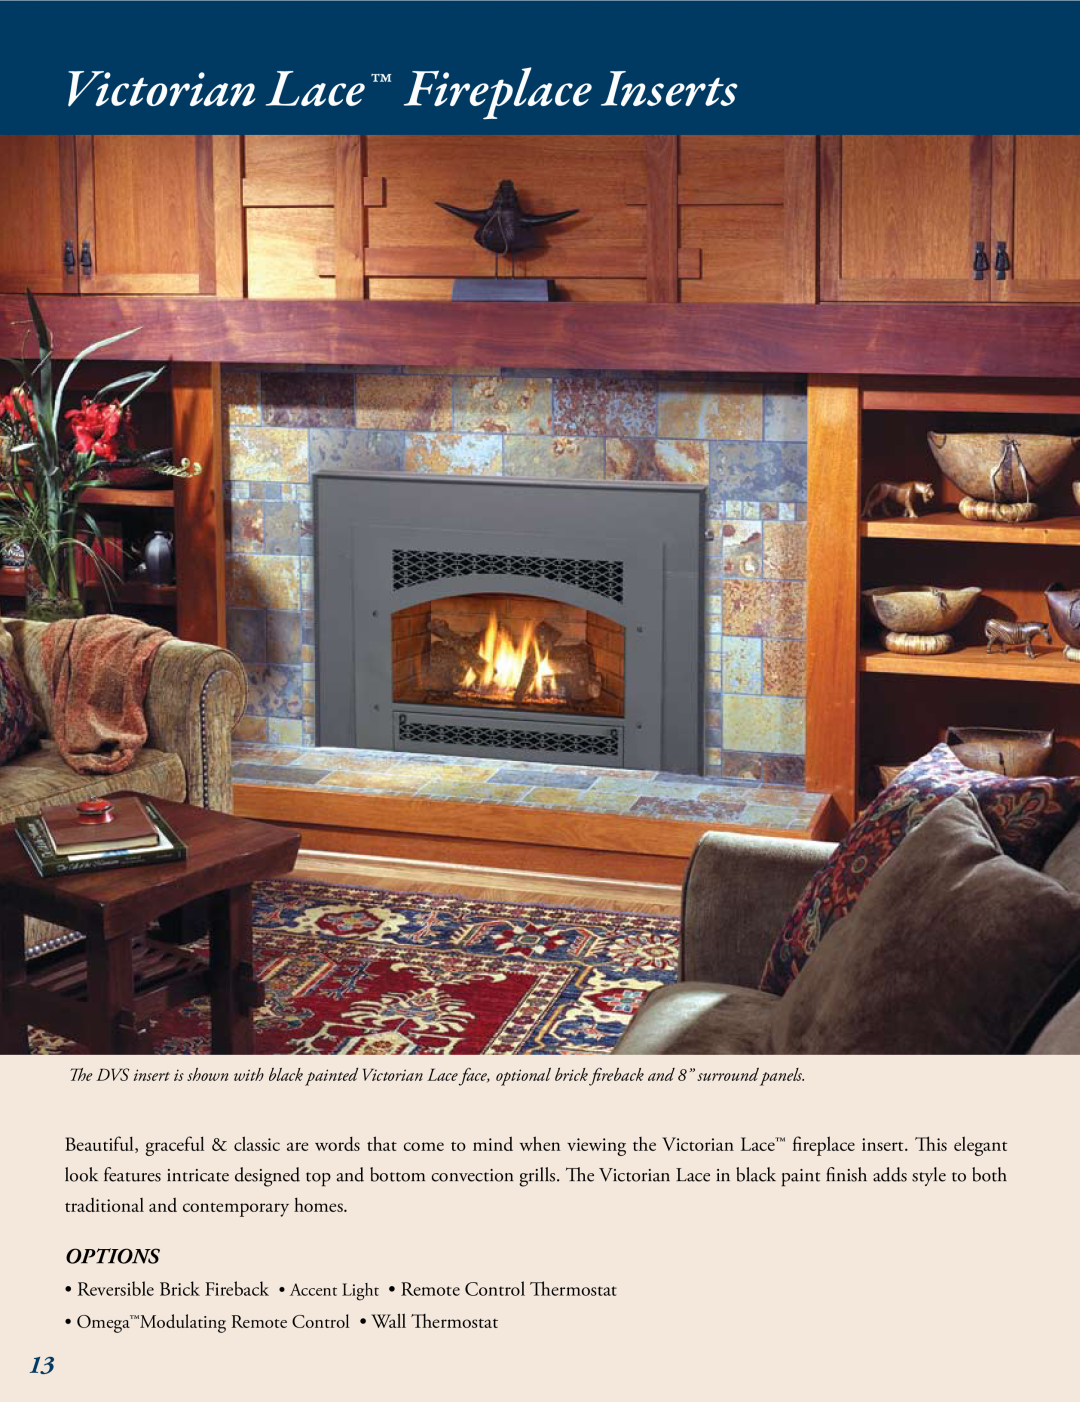 Avalon Stoves Gas Stove & Fireplace manual Victorian Lace Fireplace Inserts, Firestyles for Life 